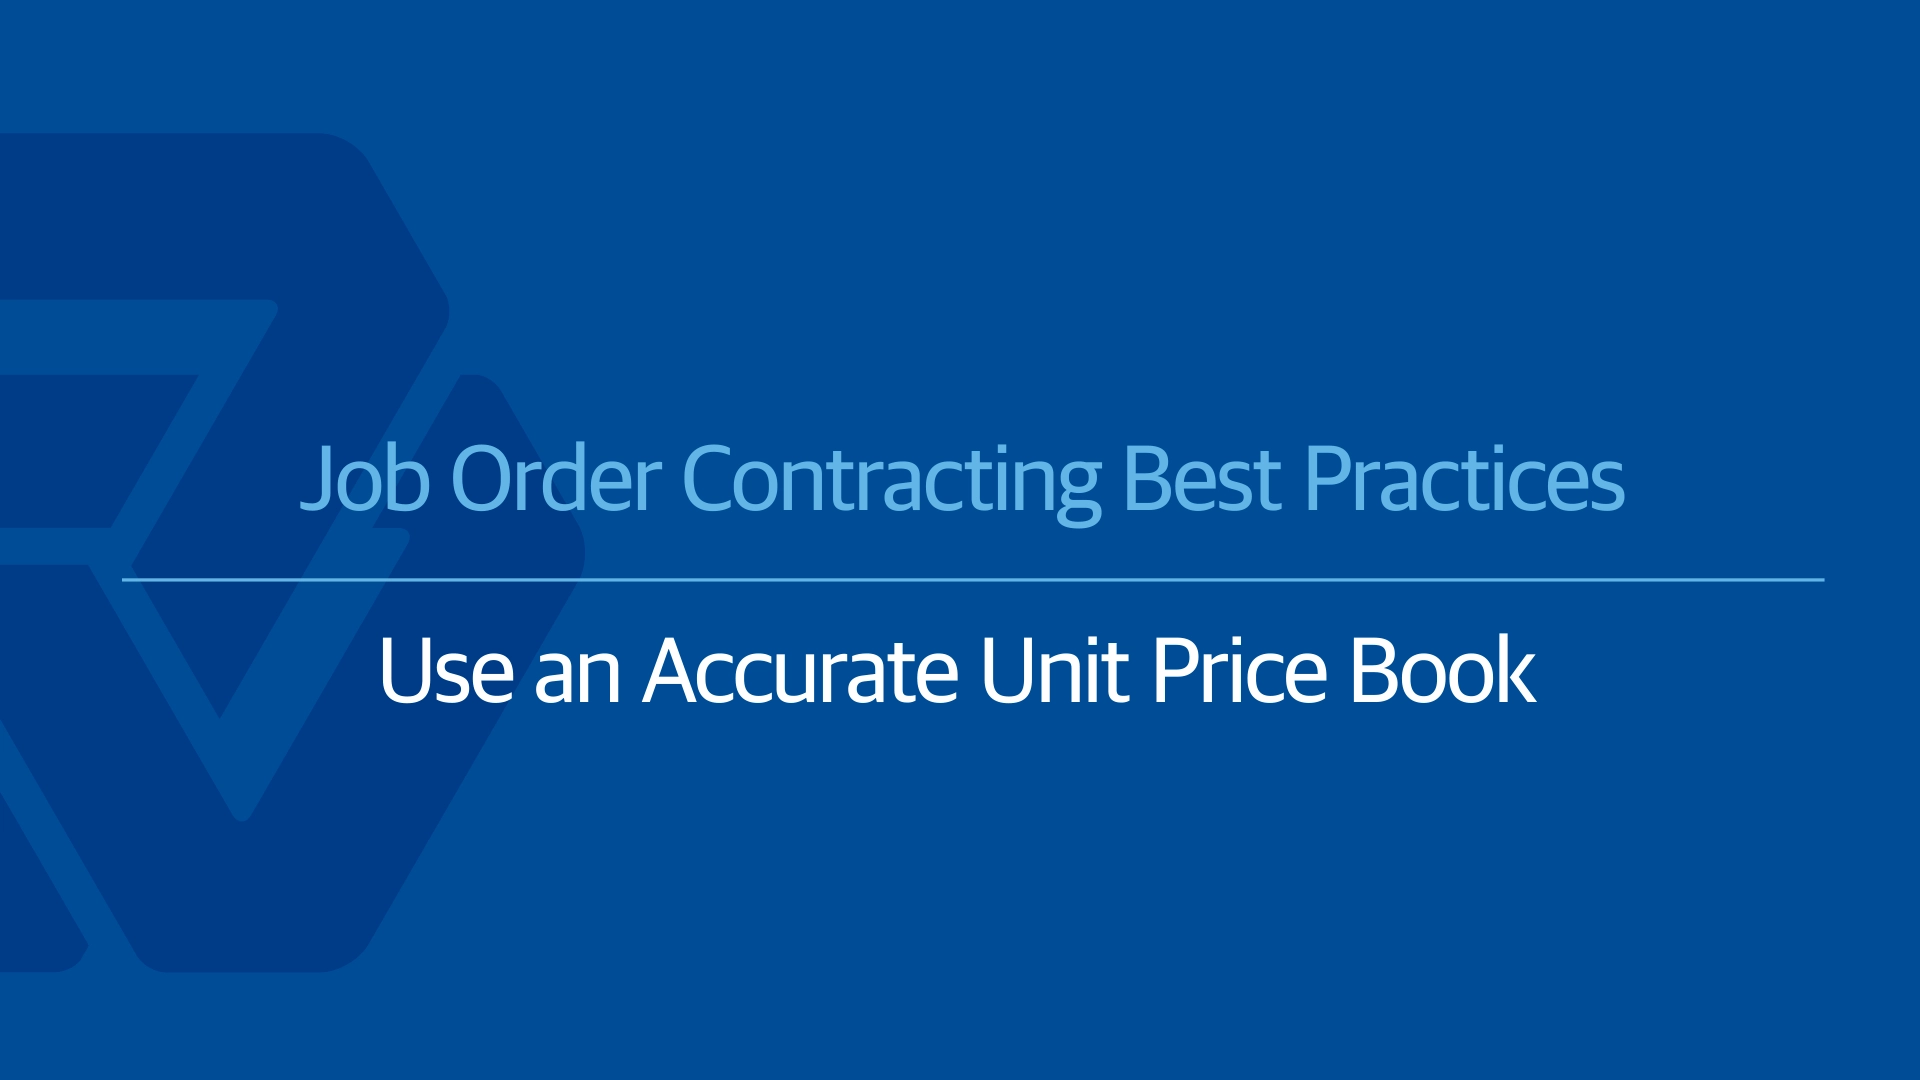 Job Order Contracting Best Practices: The Unit Price Book 1